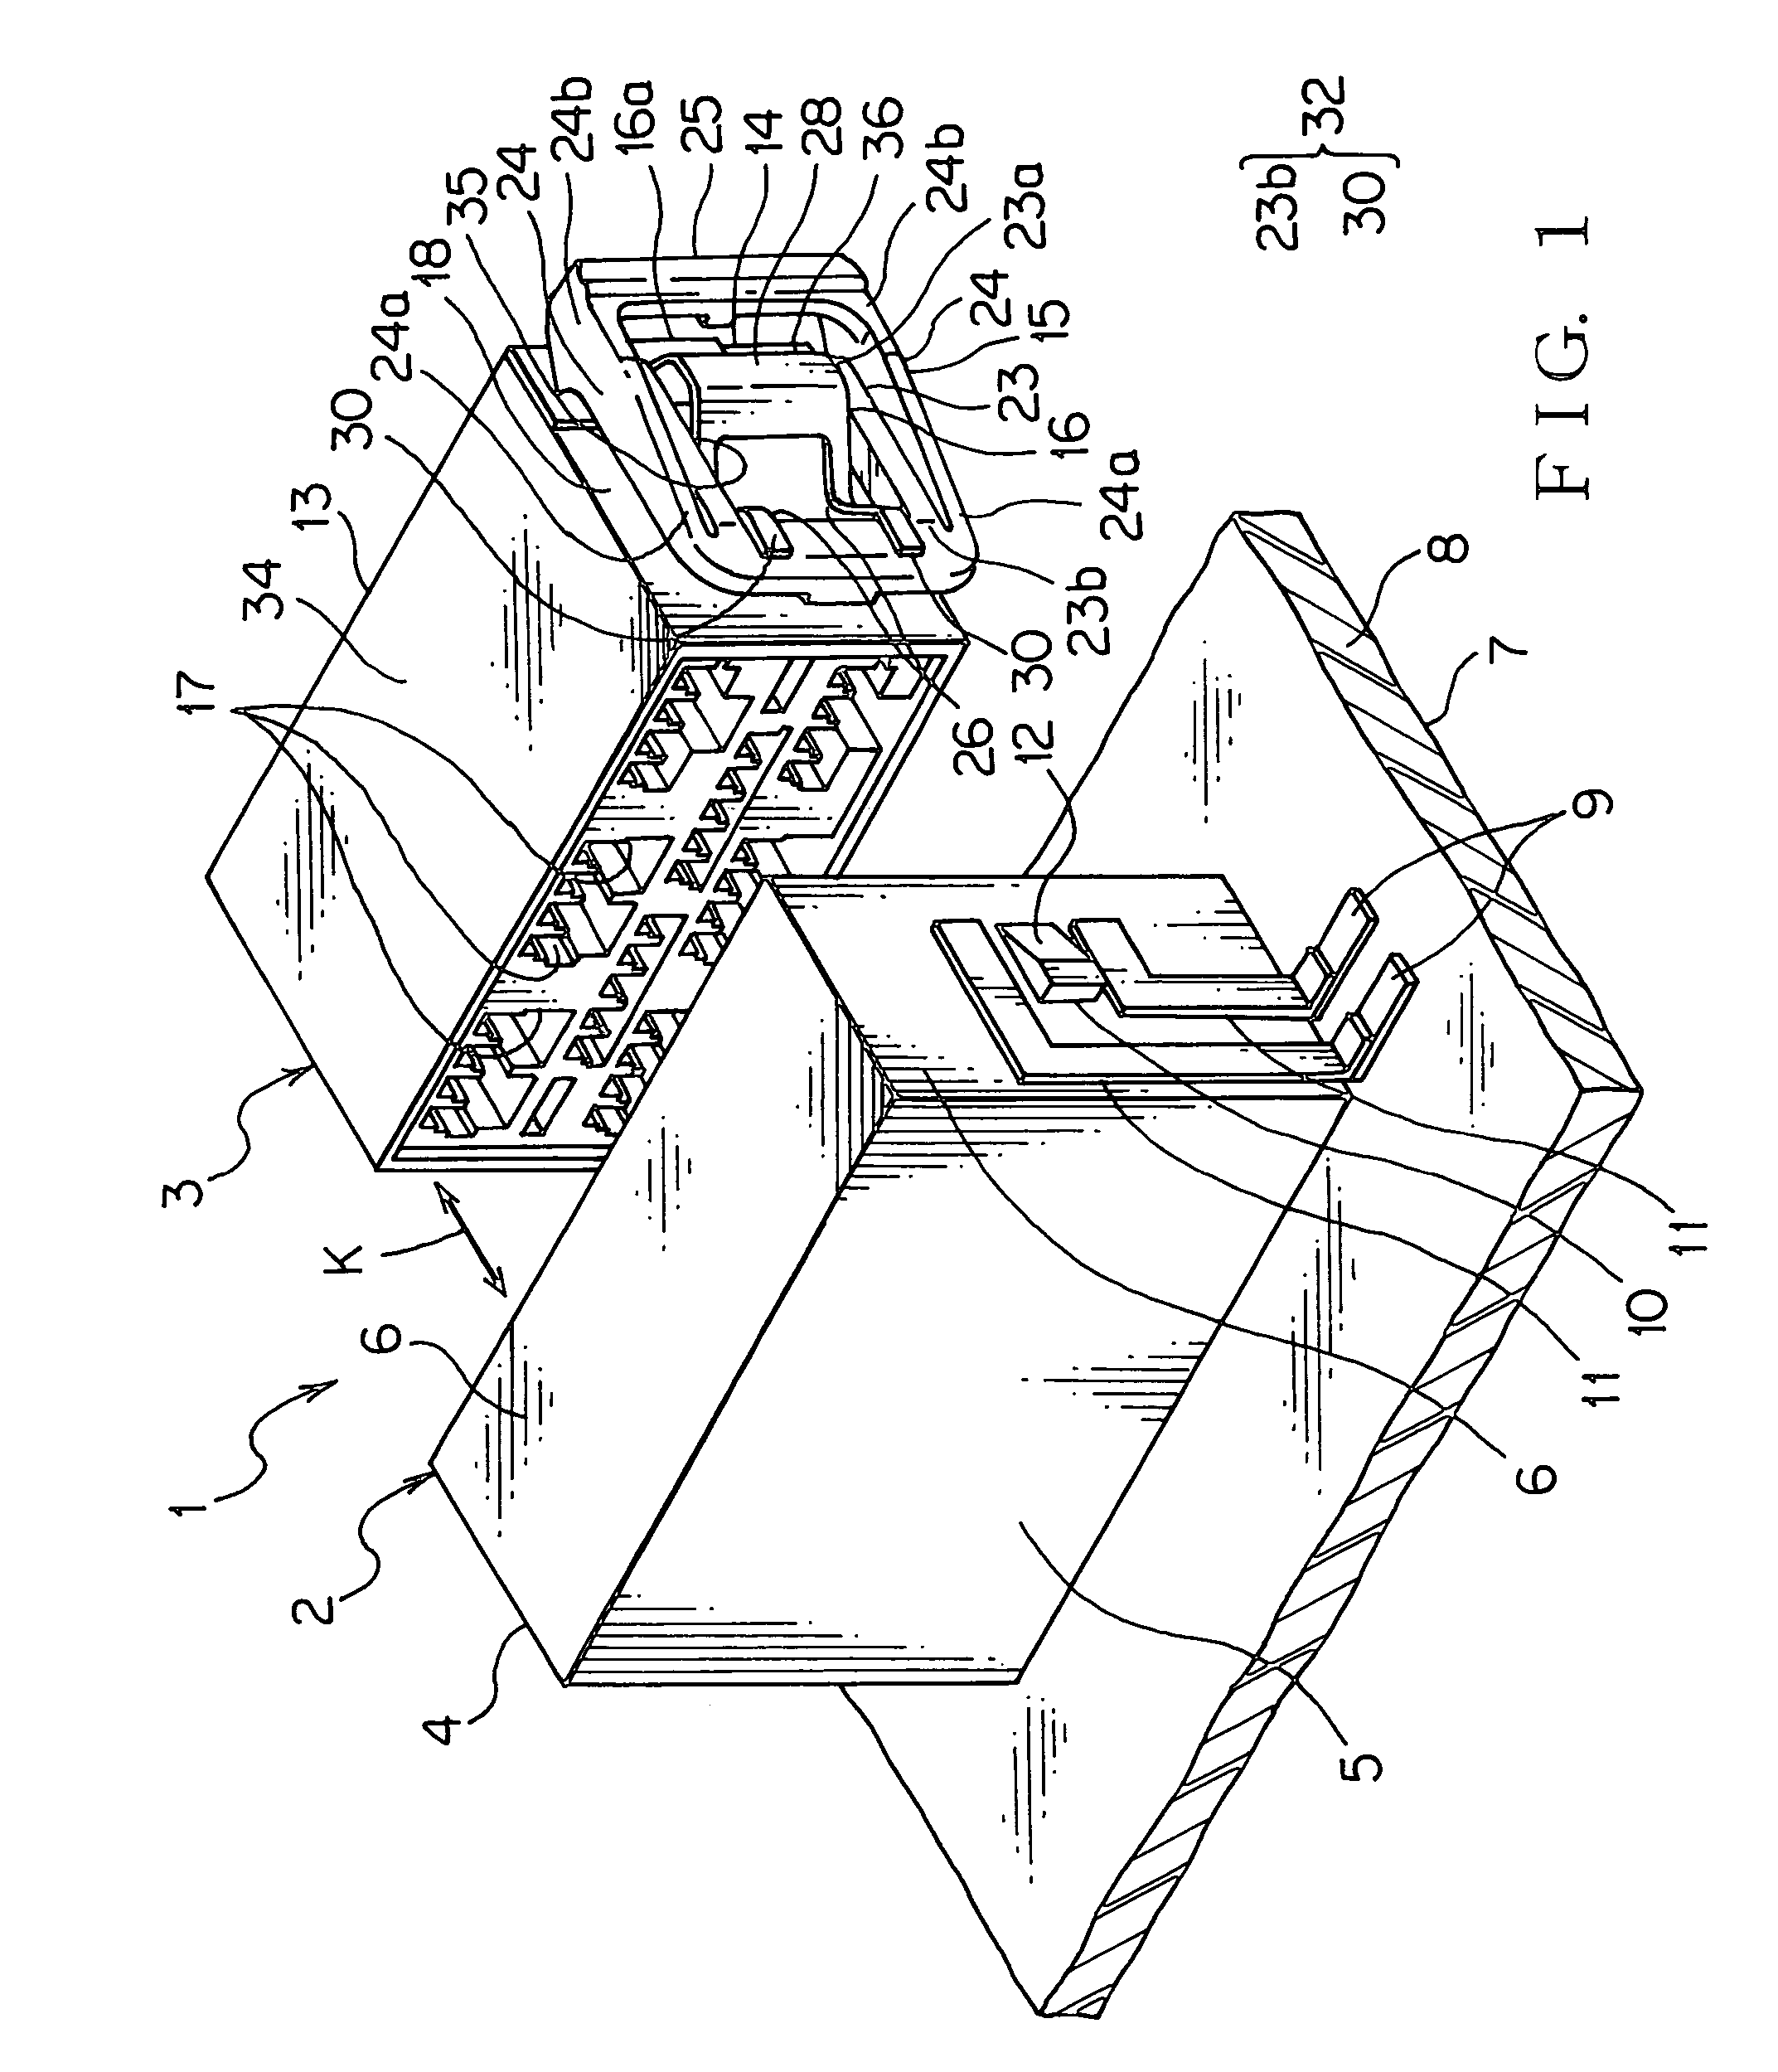 Connector system having a connection detecting mechanism